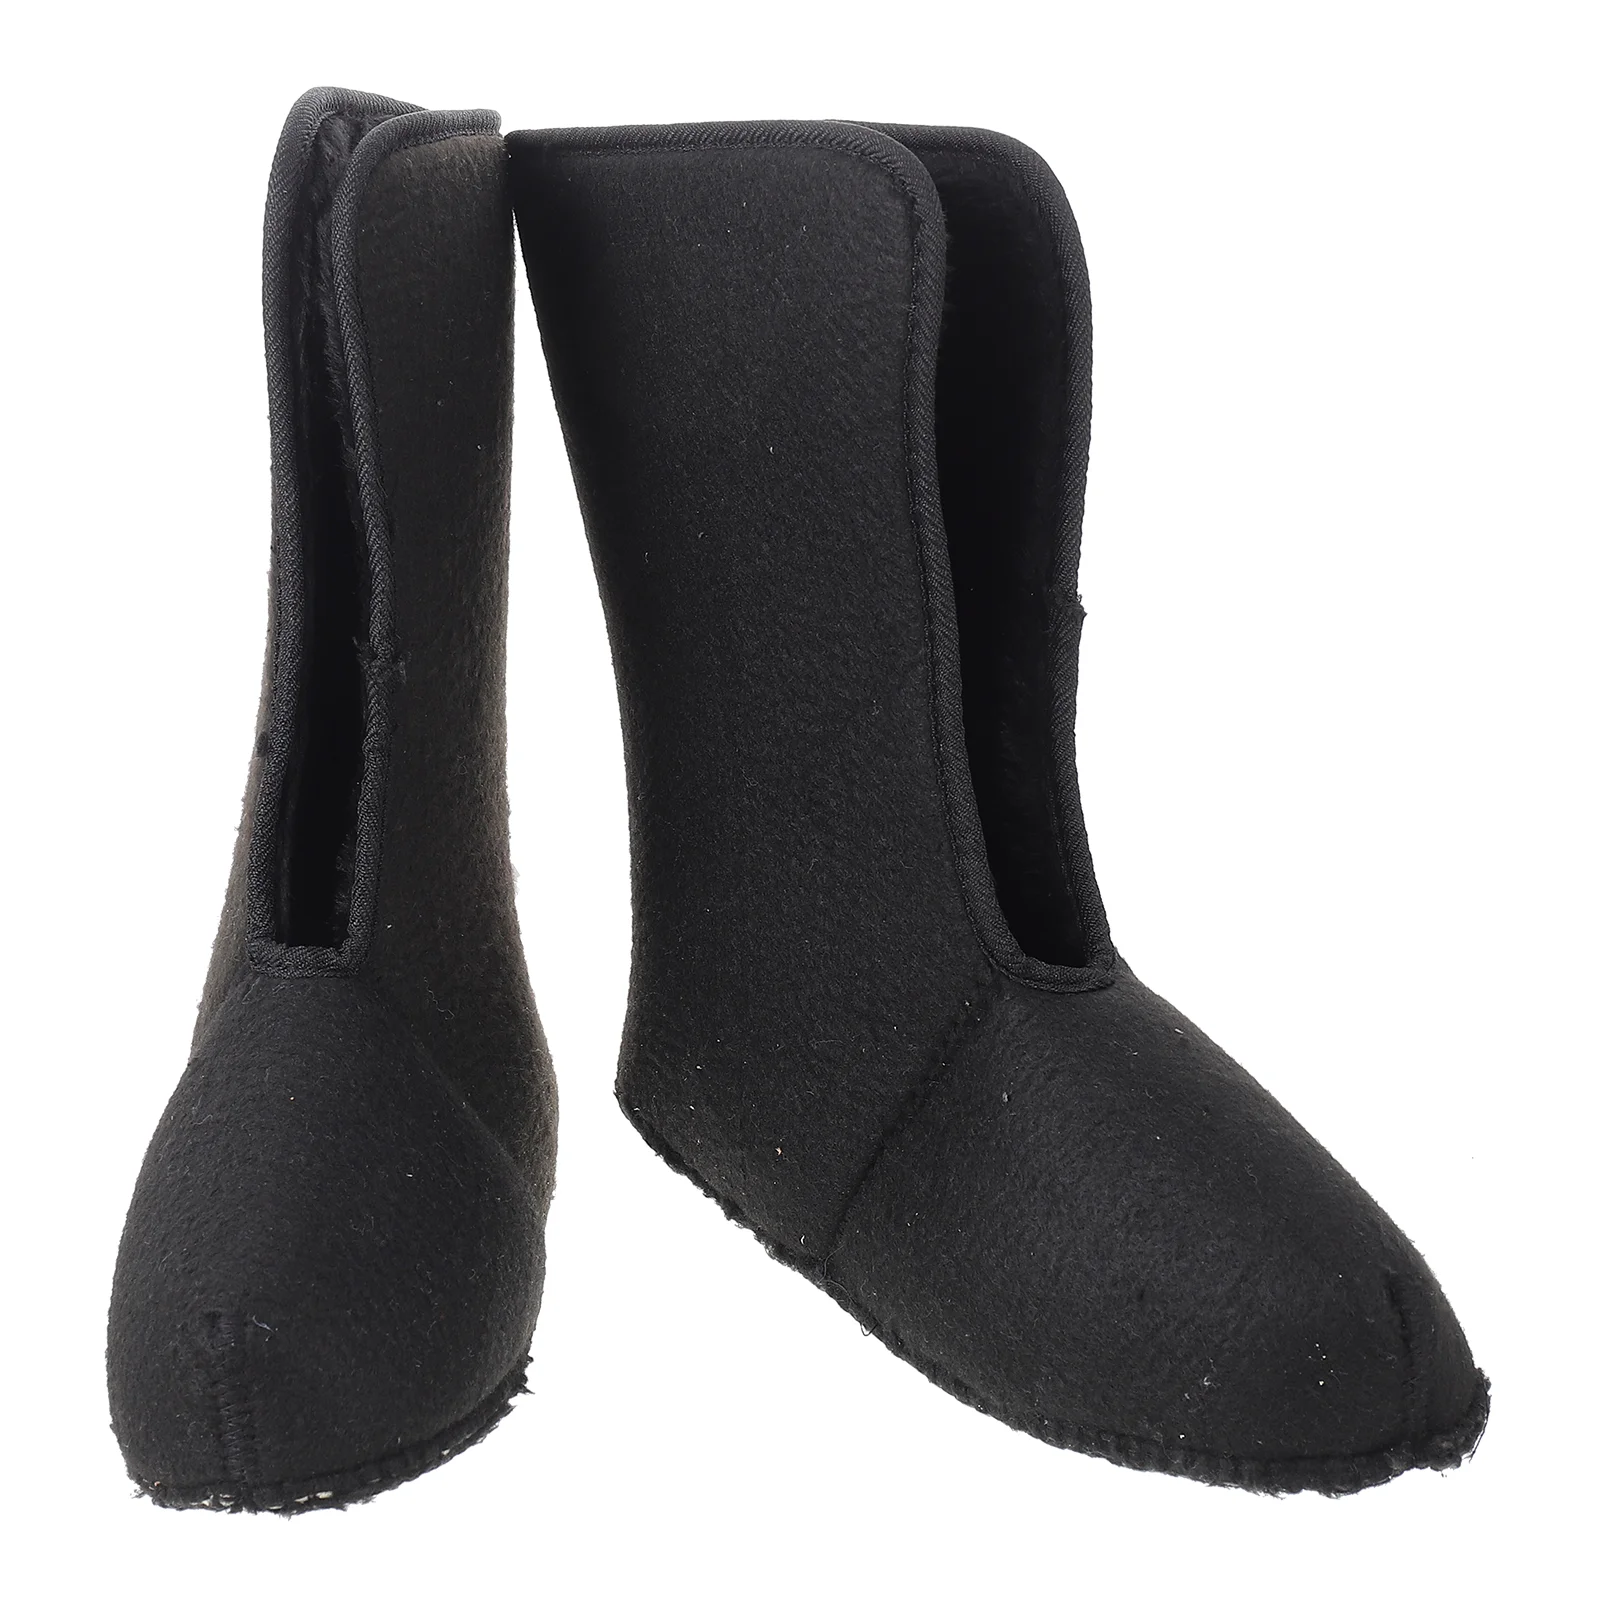 

Warmth Inside Climbing Plush Hunting Cover Man Keep Comfortable Outdoor Inner Boot Hiking Accessories Size Cushion Socks Socks